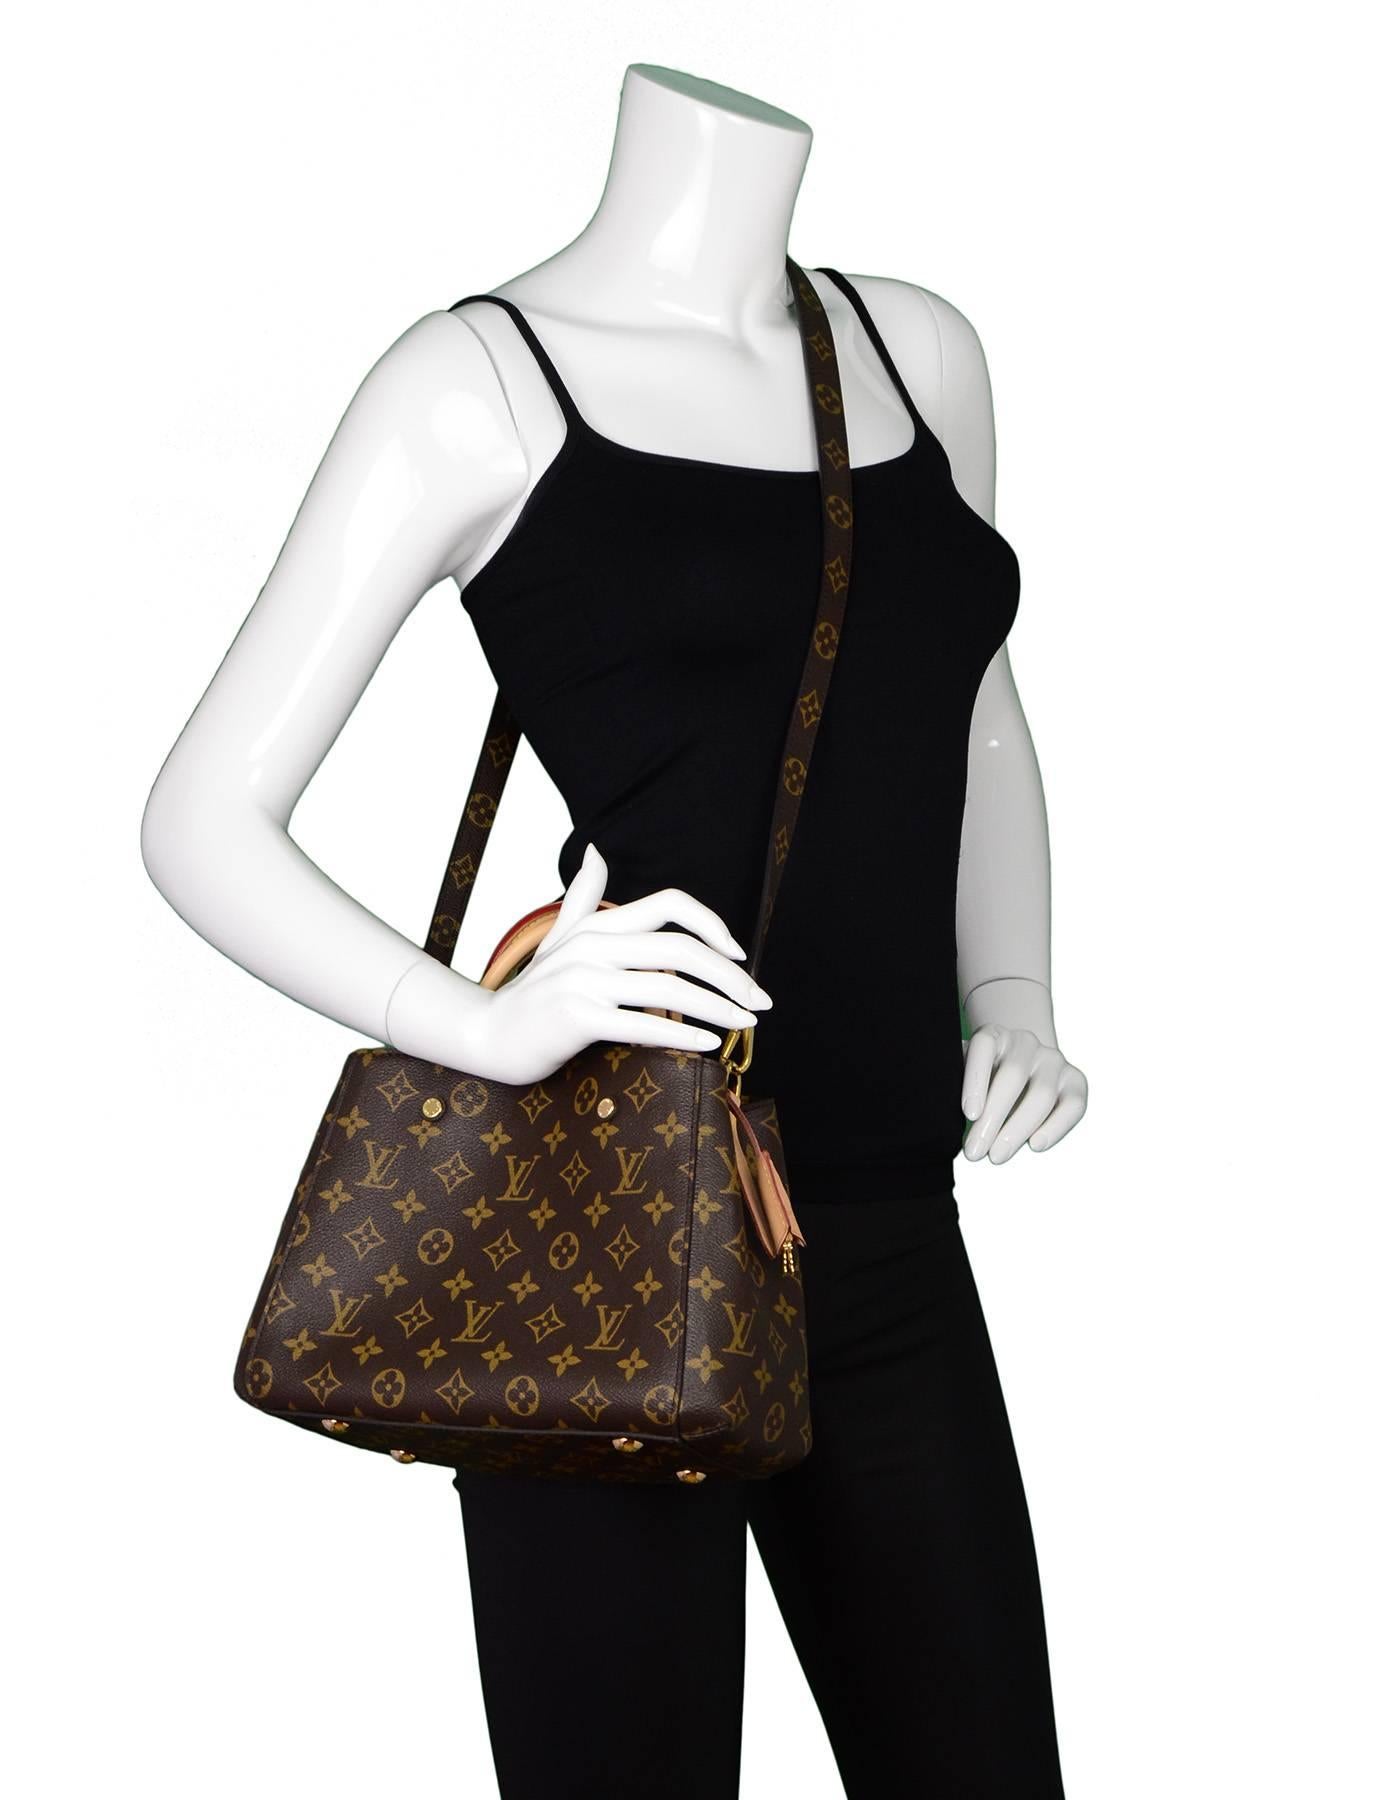 Louis Vuitton Monogram Montaigne BB Satchel Bag
Features optional monogram crossbody strap

Made In: France
Year of Production: 2015
Color: Brown
Hardware: Goldtone
Materials: Coated canvas, vachetta leather
Lining: Burgendy